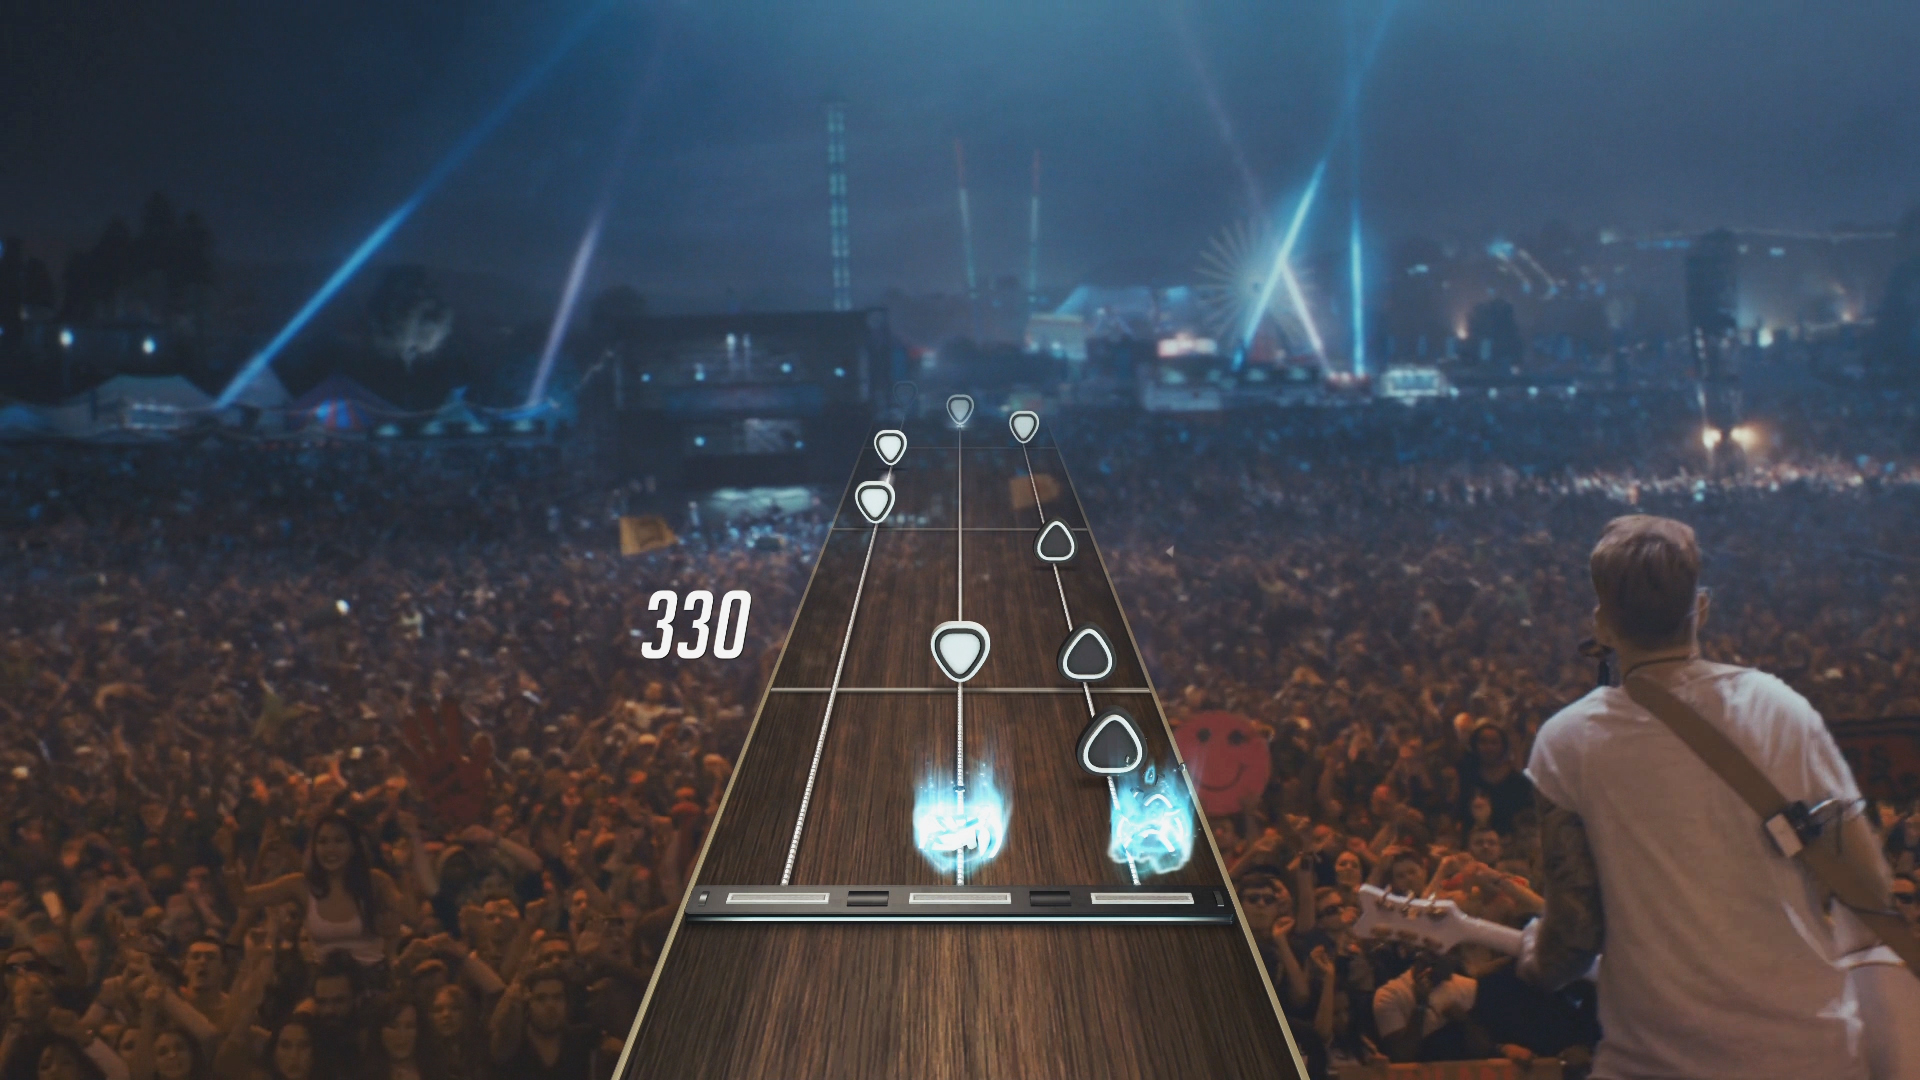 Play Guitar Hero Live At Best Buy Stores In New York And La Best Buy Corporate News And Information